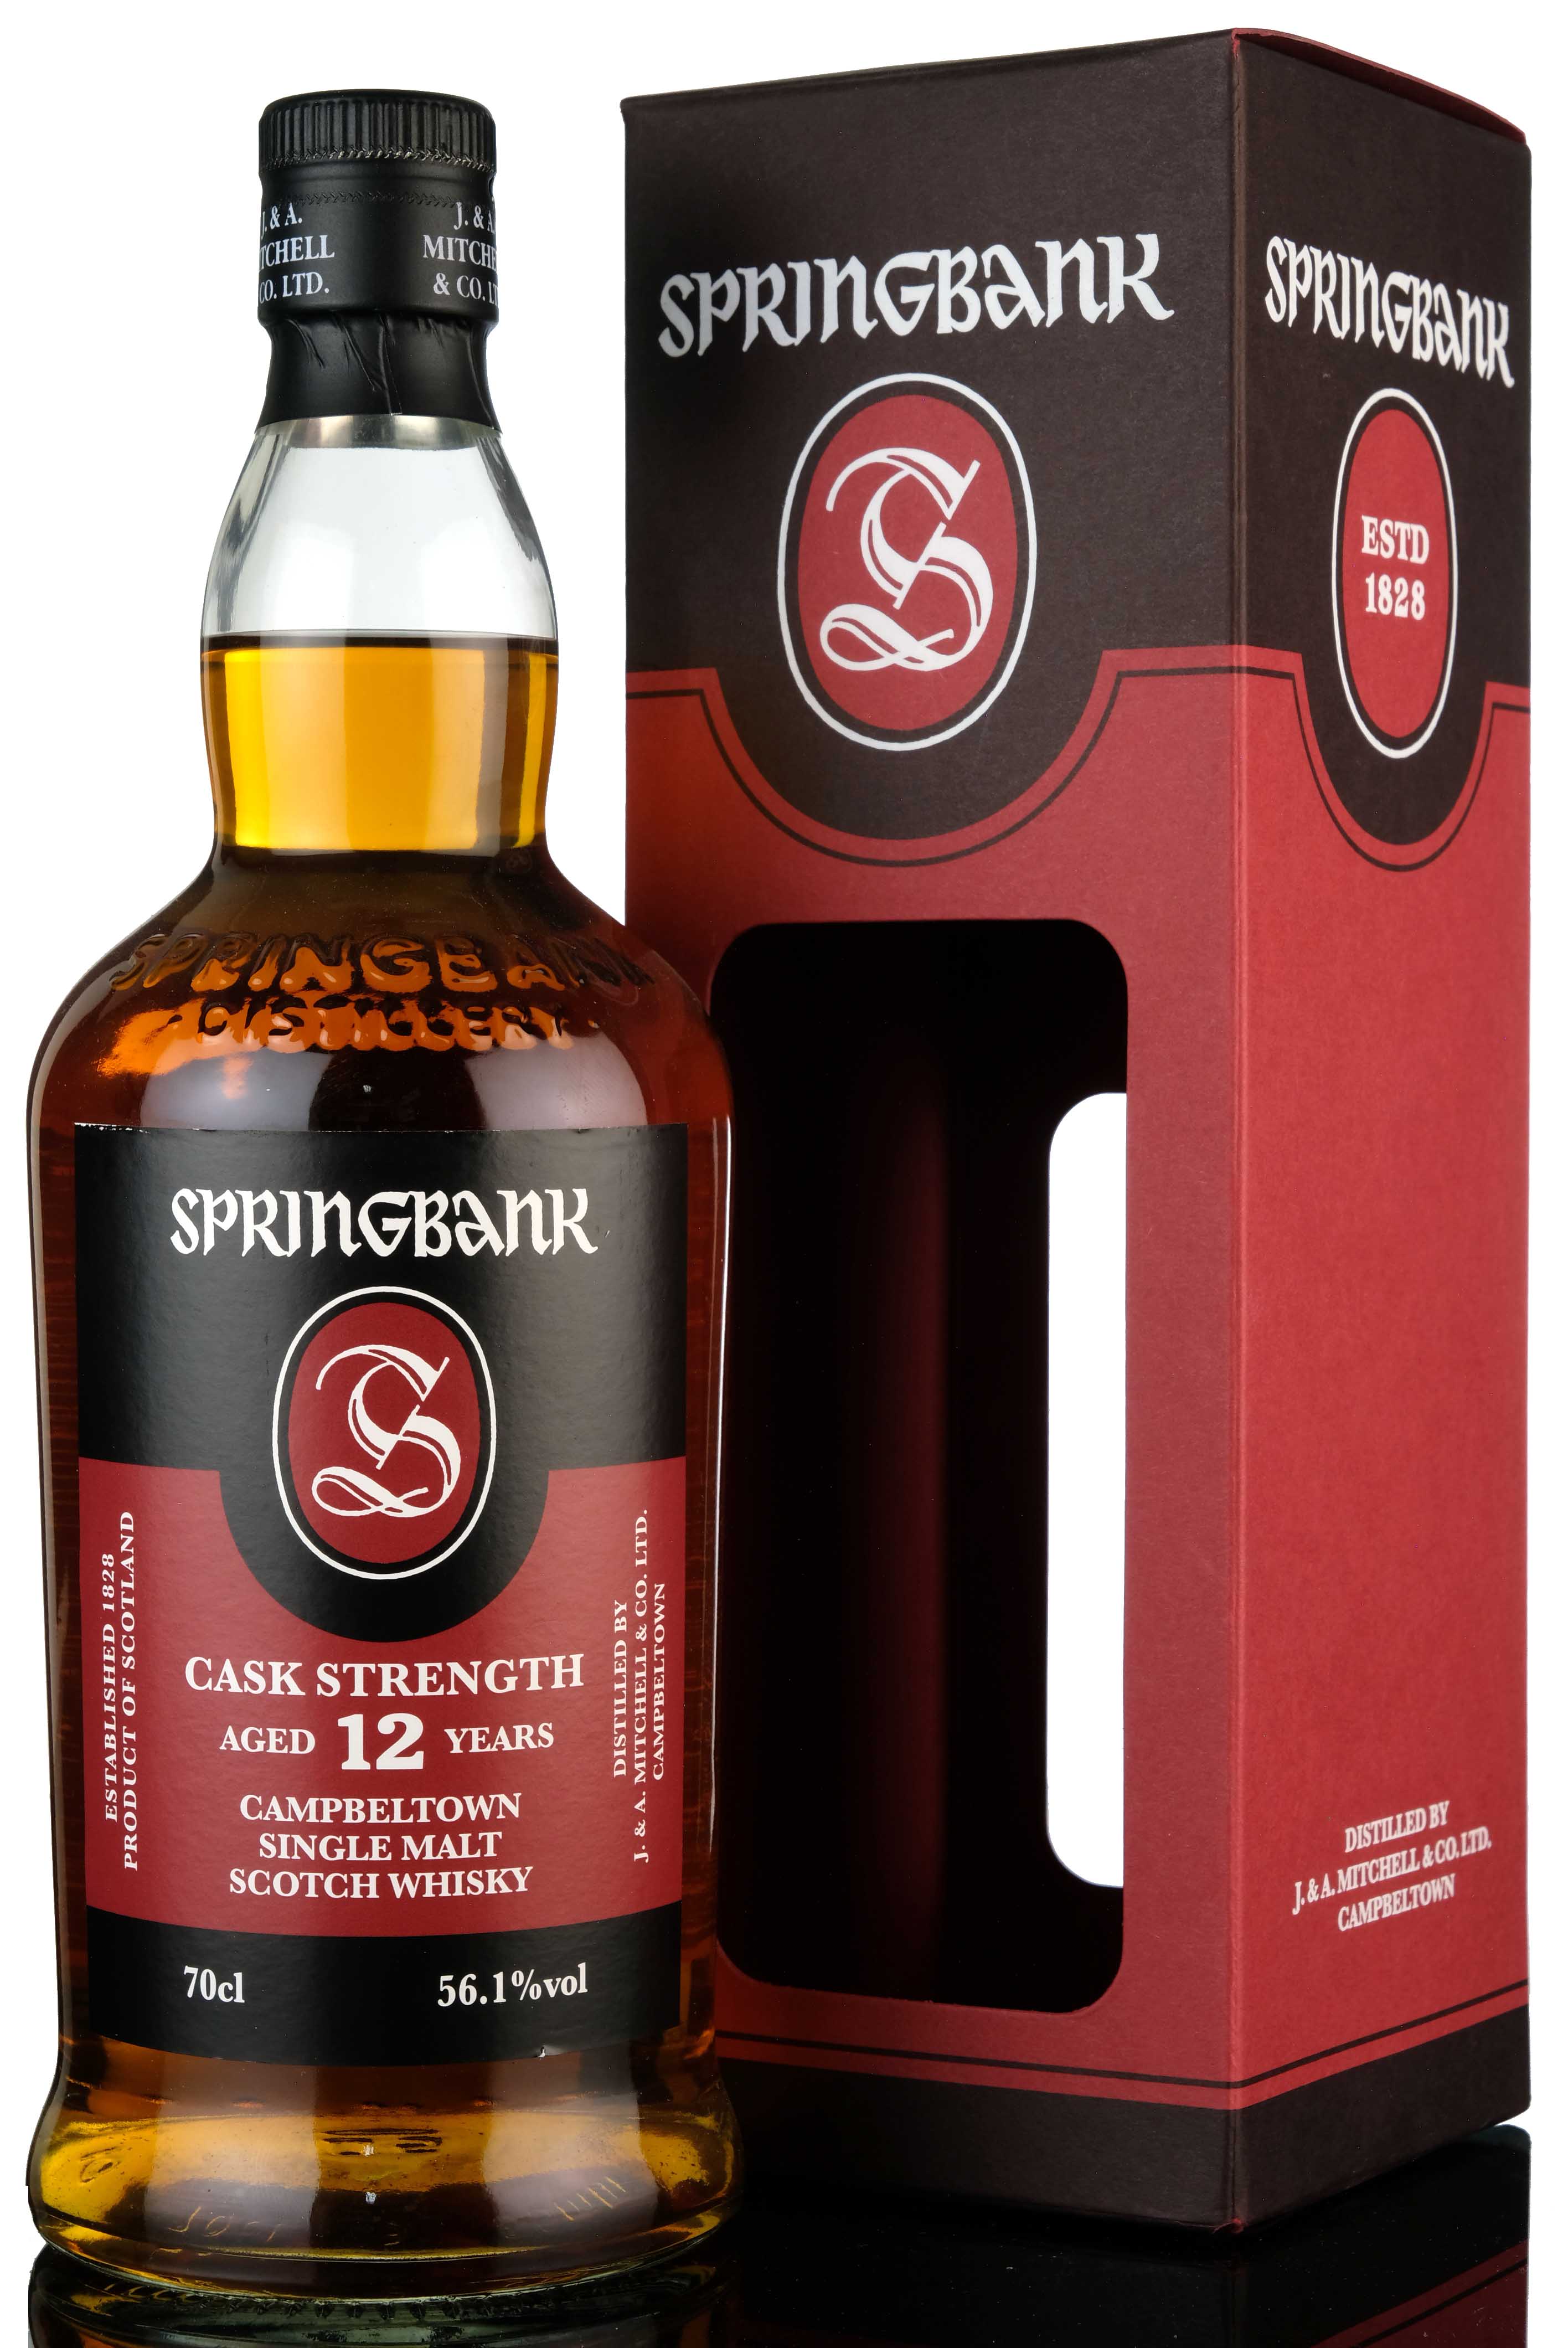 Springbank 12 Year Old - Cask Strength 56.1% - 2020 Release